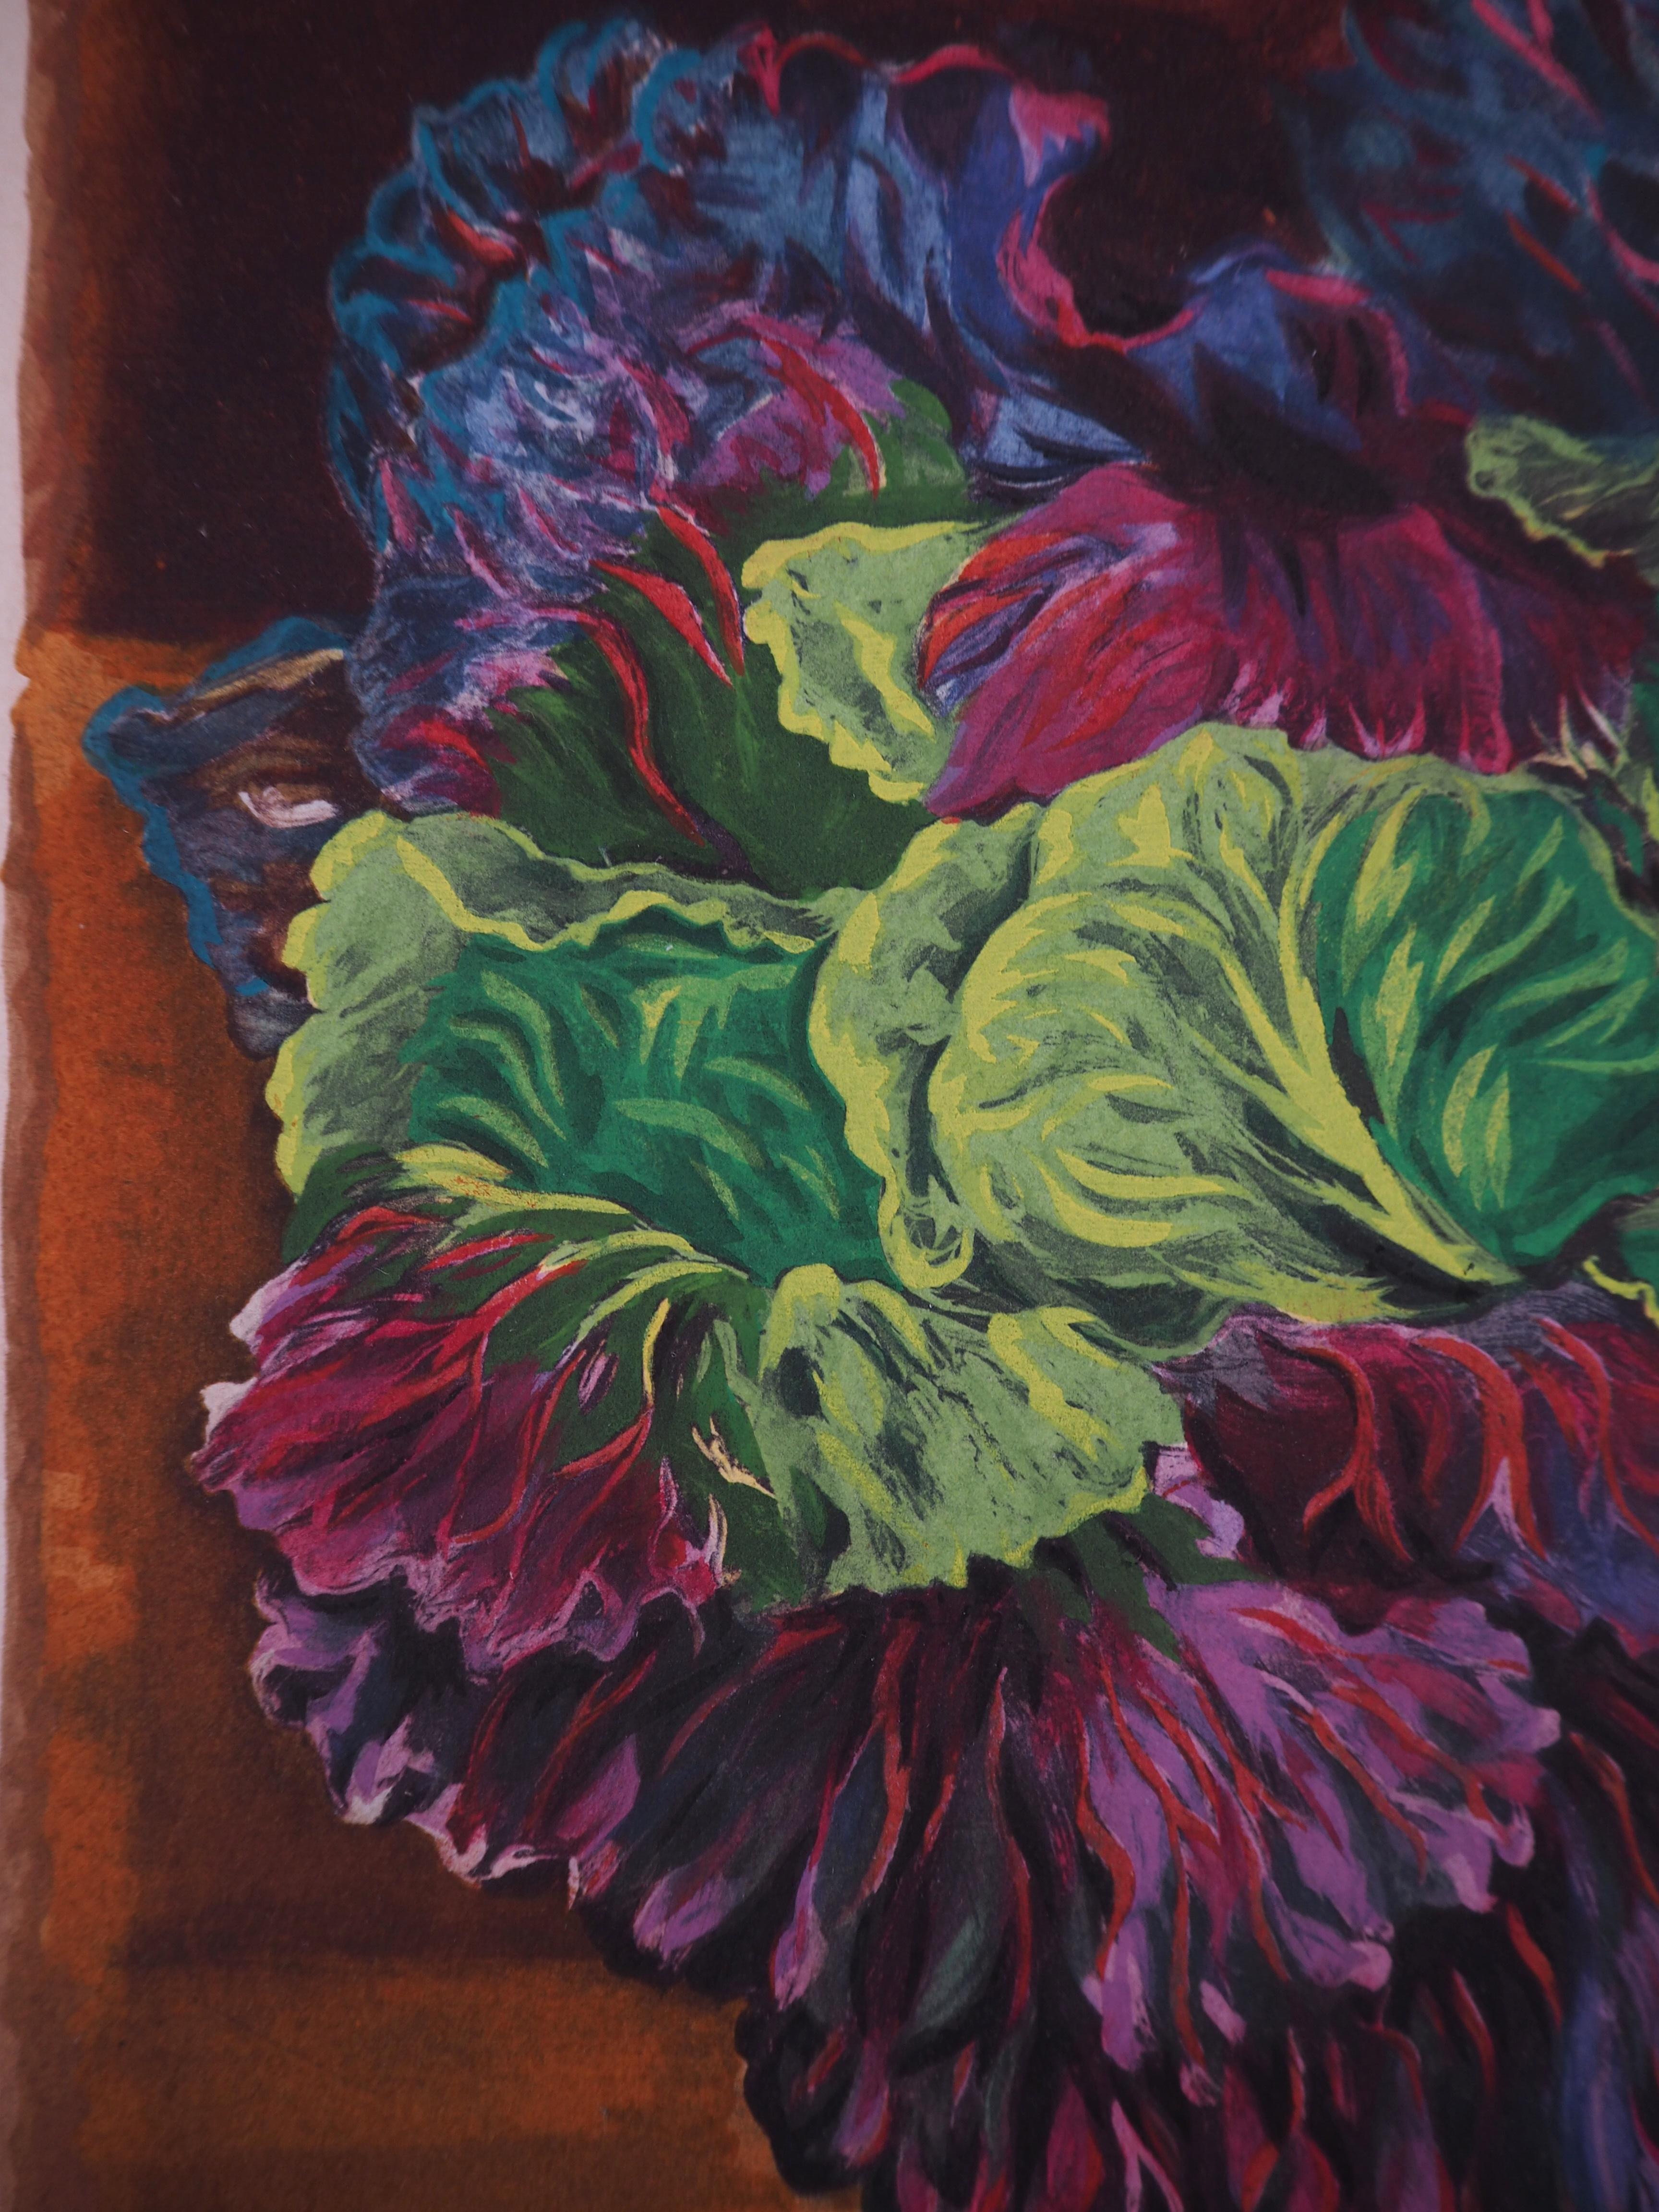 Still-life with Cabbage and Garlic - Original Lithograph - Modern Print by Moise Kisling